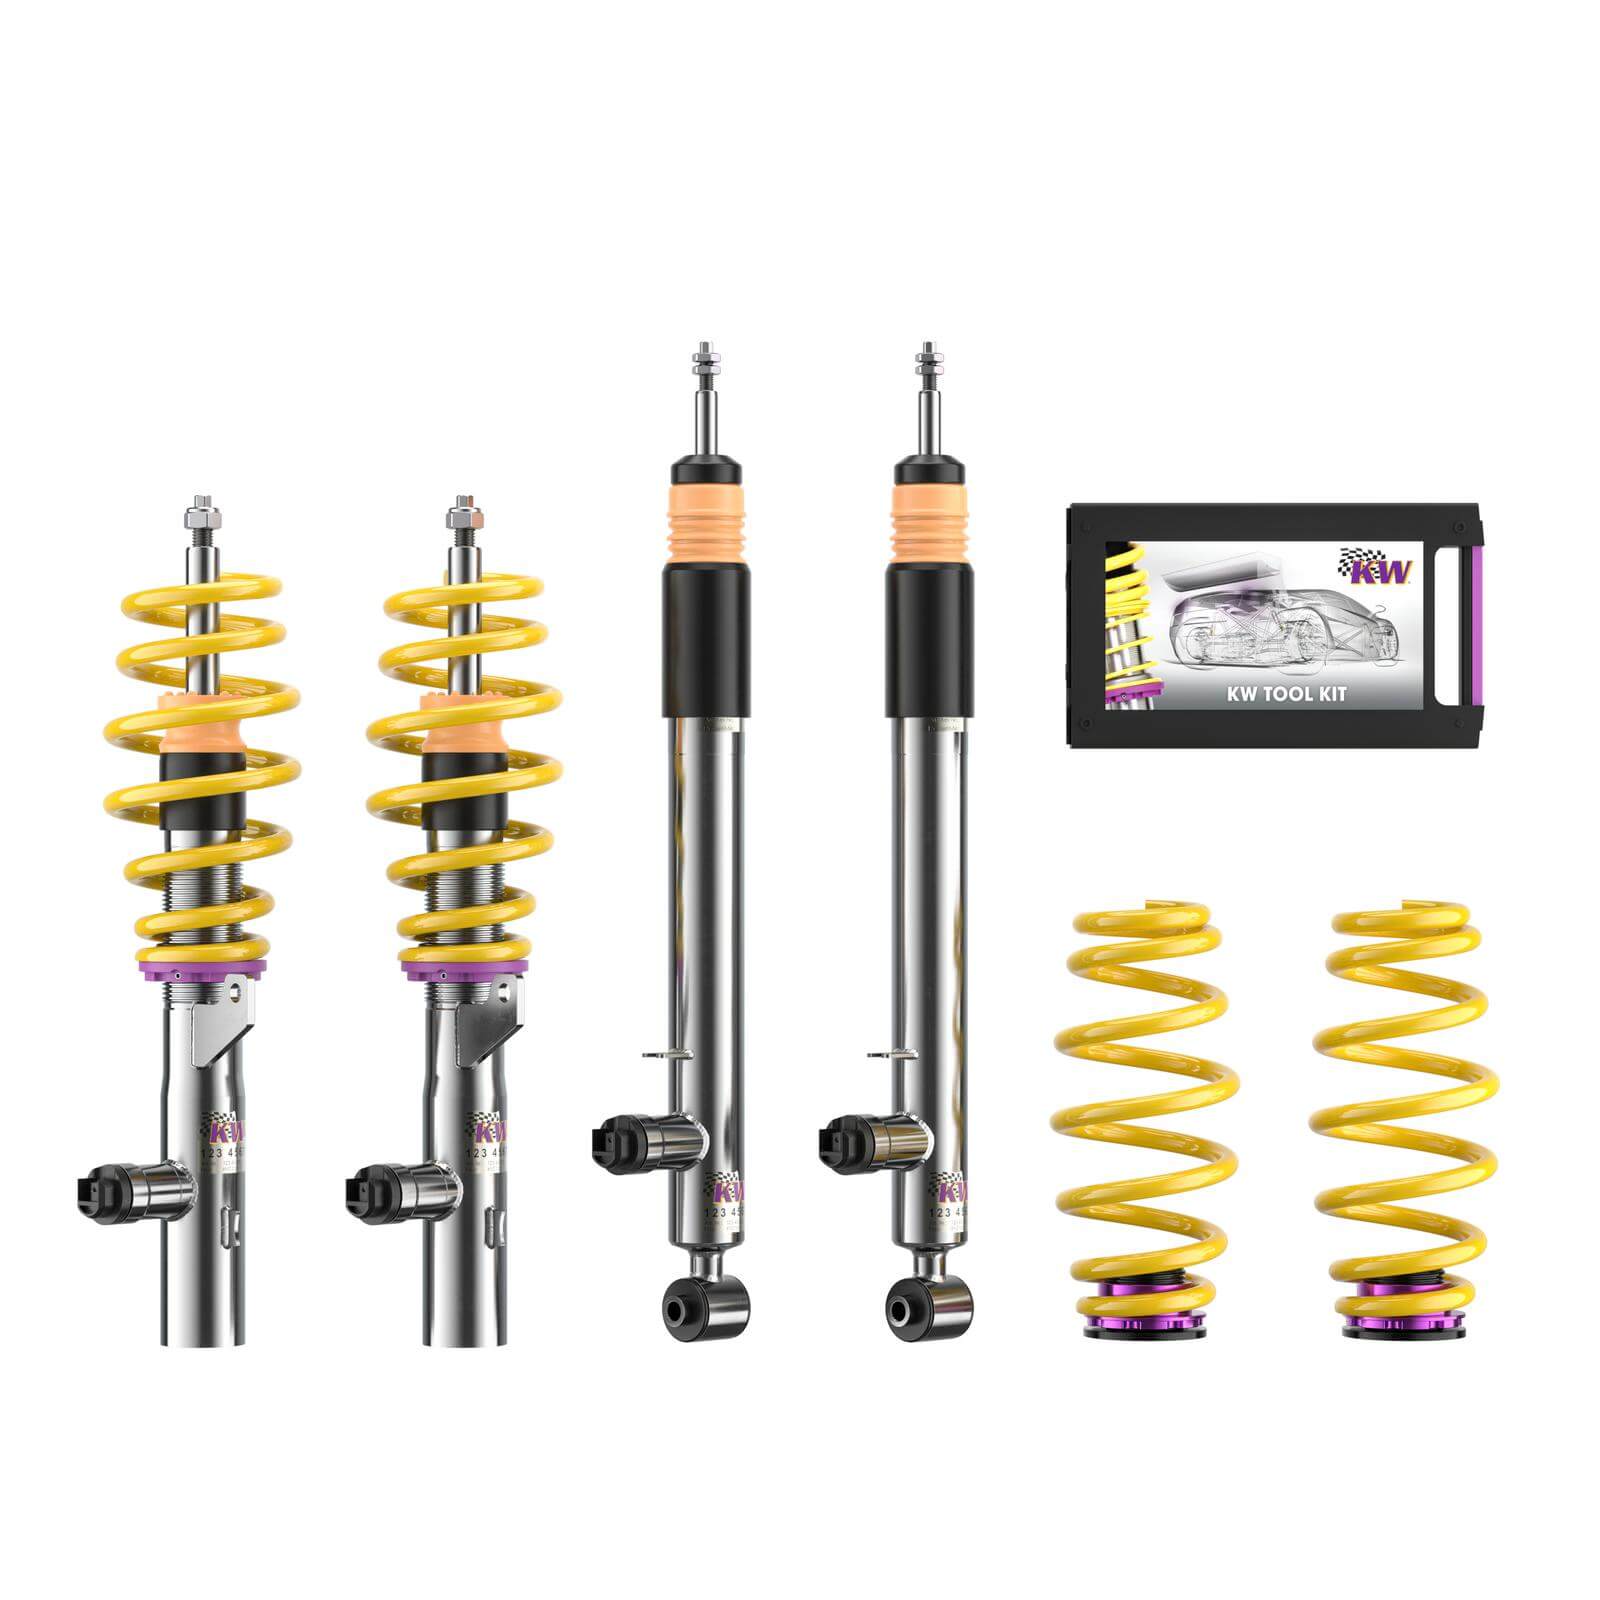 KW 39080064 Coilover kit DDC Plug & play for VW Golf VIII Variant (CG5) 2020+ Photo-0 